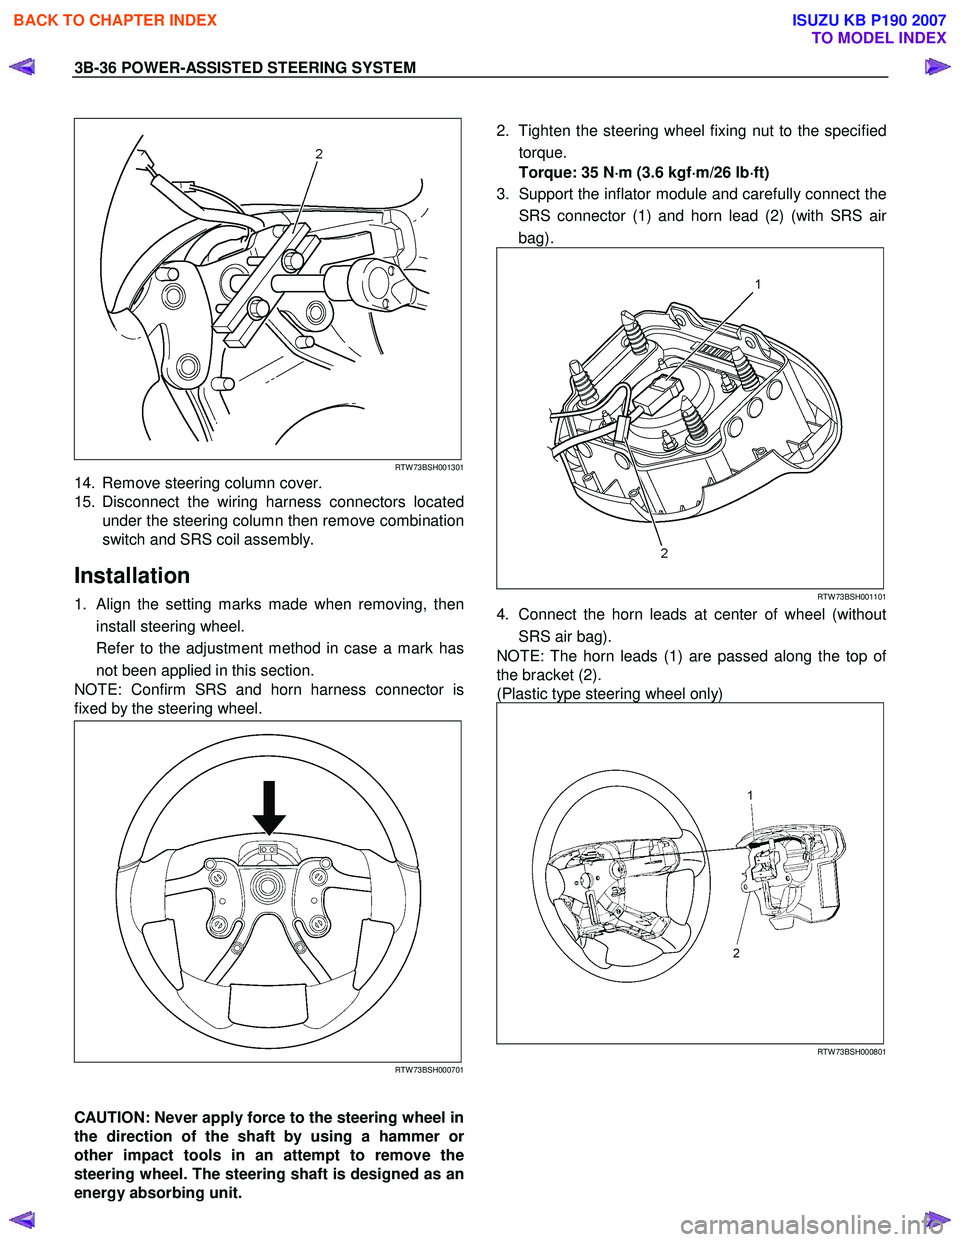 ISUZU KB P190 2007  Workshop Repair Manual 3B-36 POWER-ASSISTED STEERING SYSTEM 
 
 
RTW 73BSH001301
14.  Remove steering column cover.  
15. Disconnect the wiring harness connectors located under the steering column then remove combination
sw